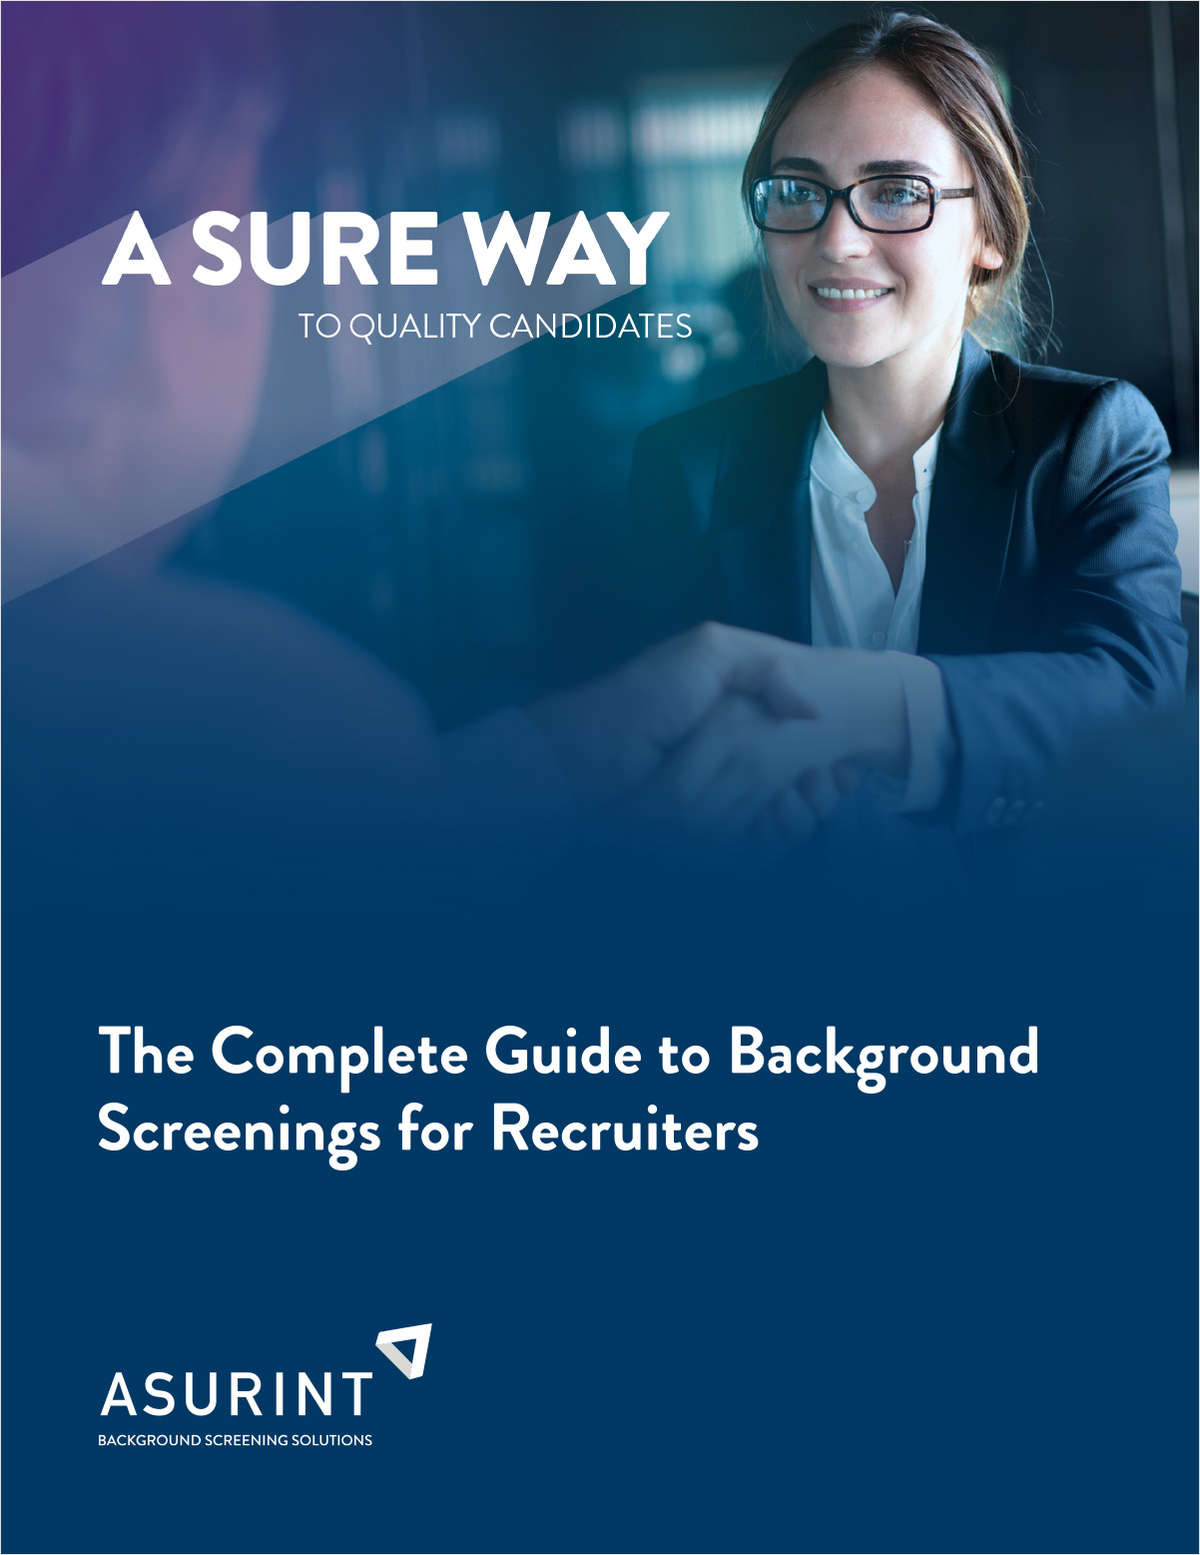 The Complete Guide - Background Screenings for Recruiters